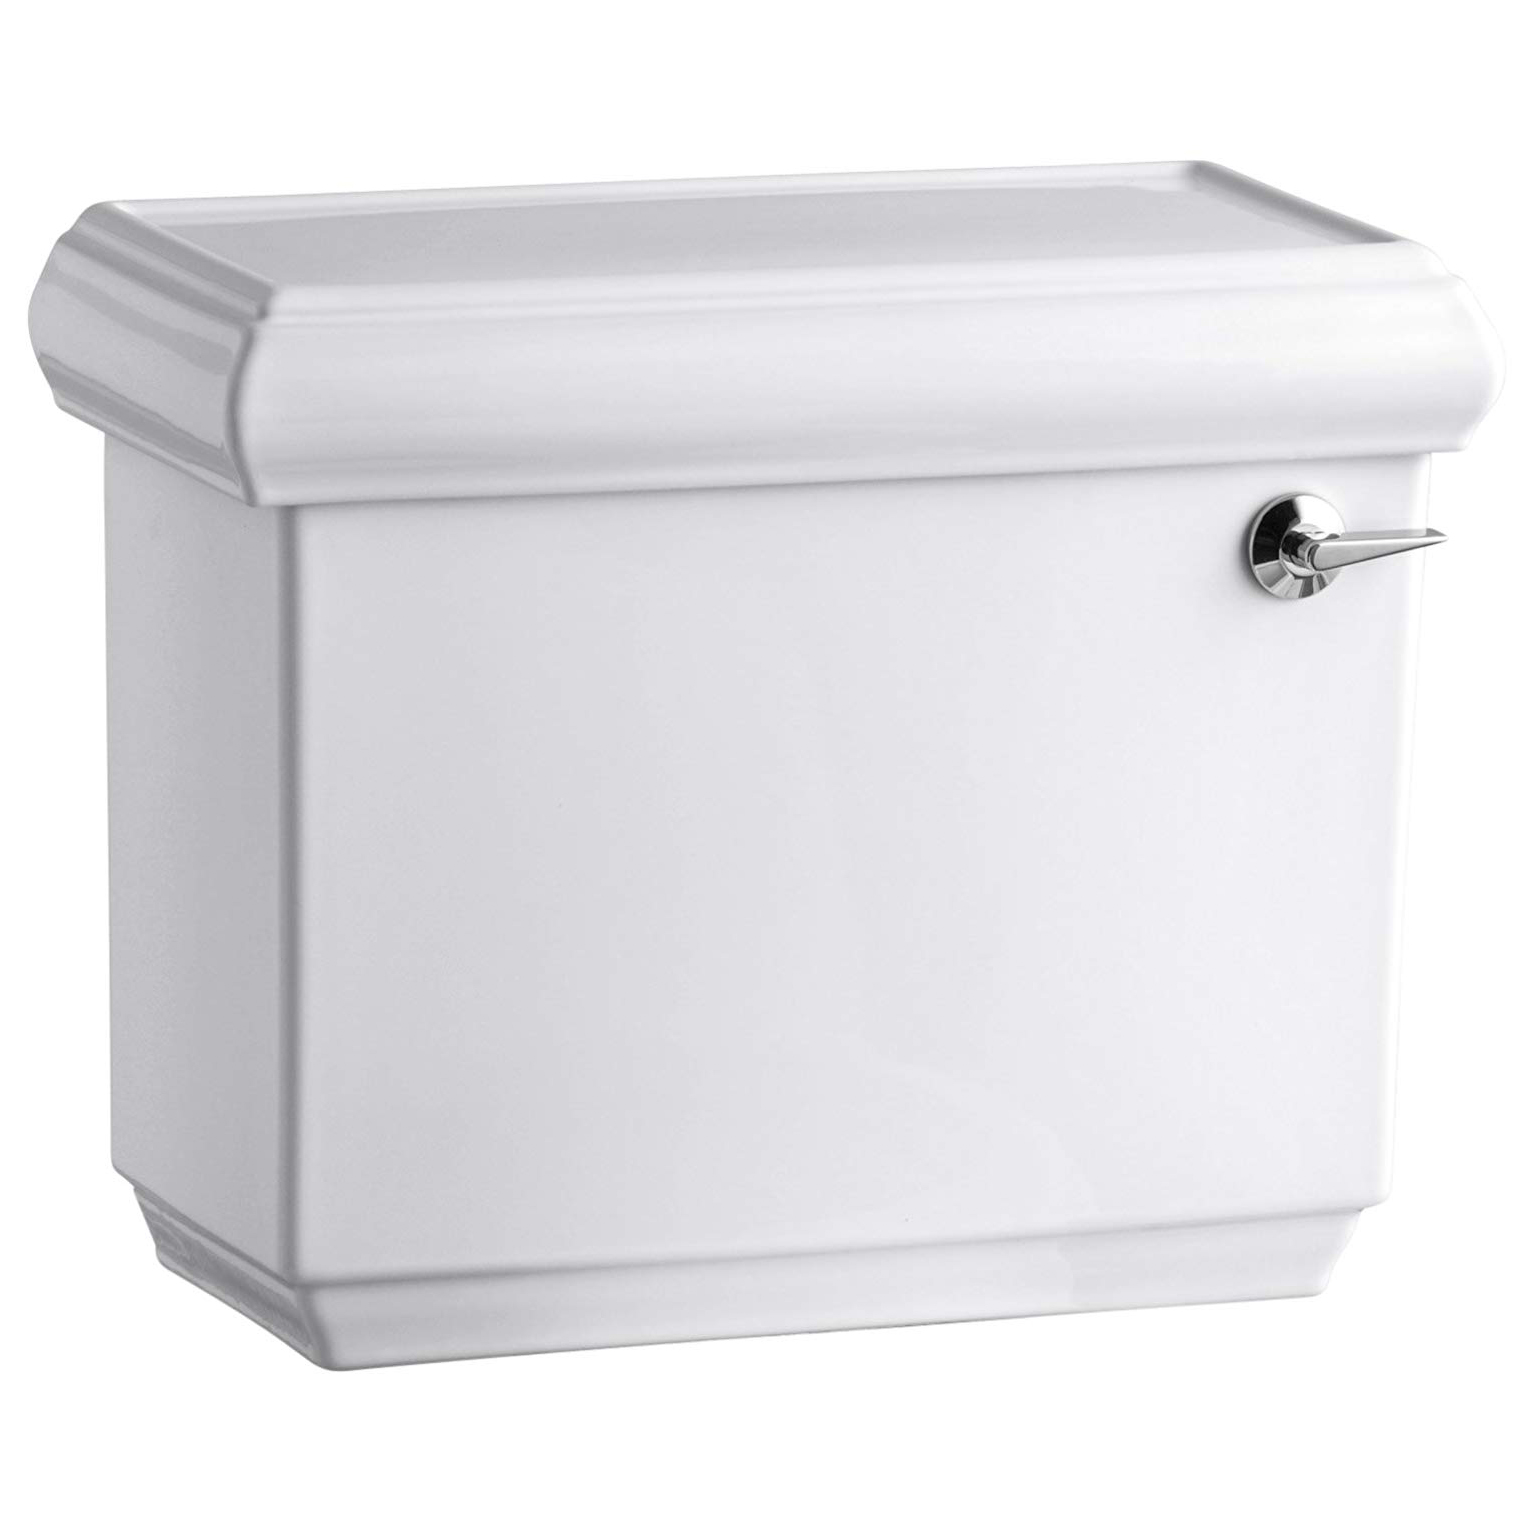 Memoirs Classic 1.28 gpf Toilet Tank w/Right Lever in White